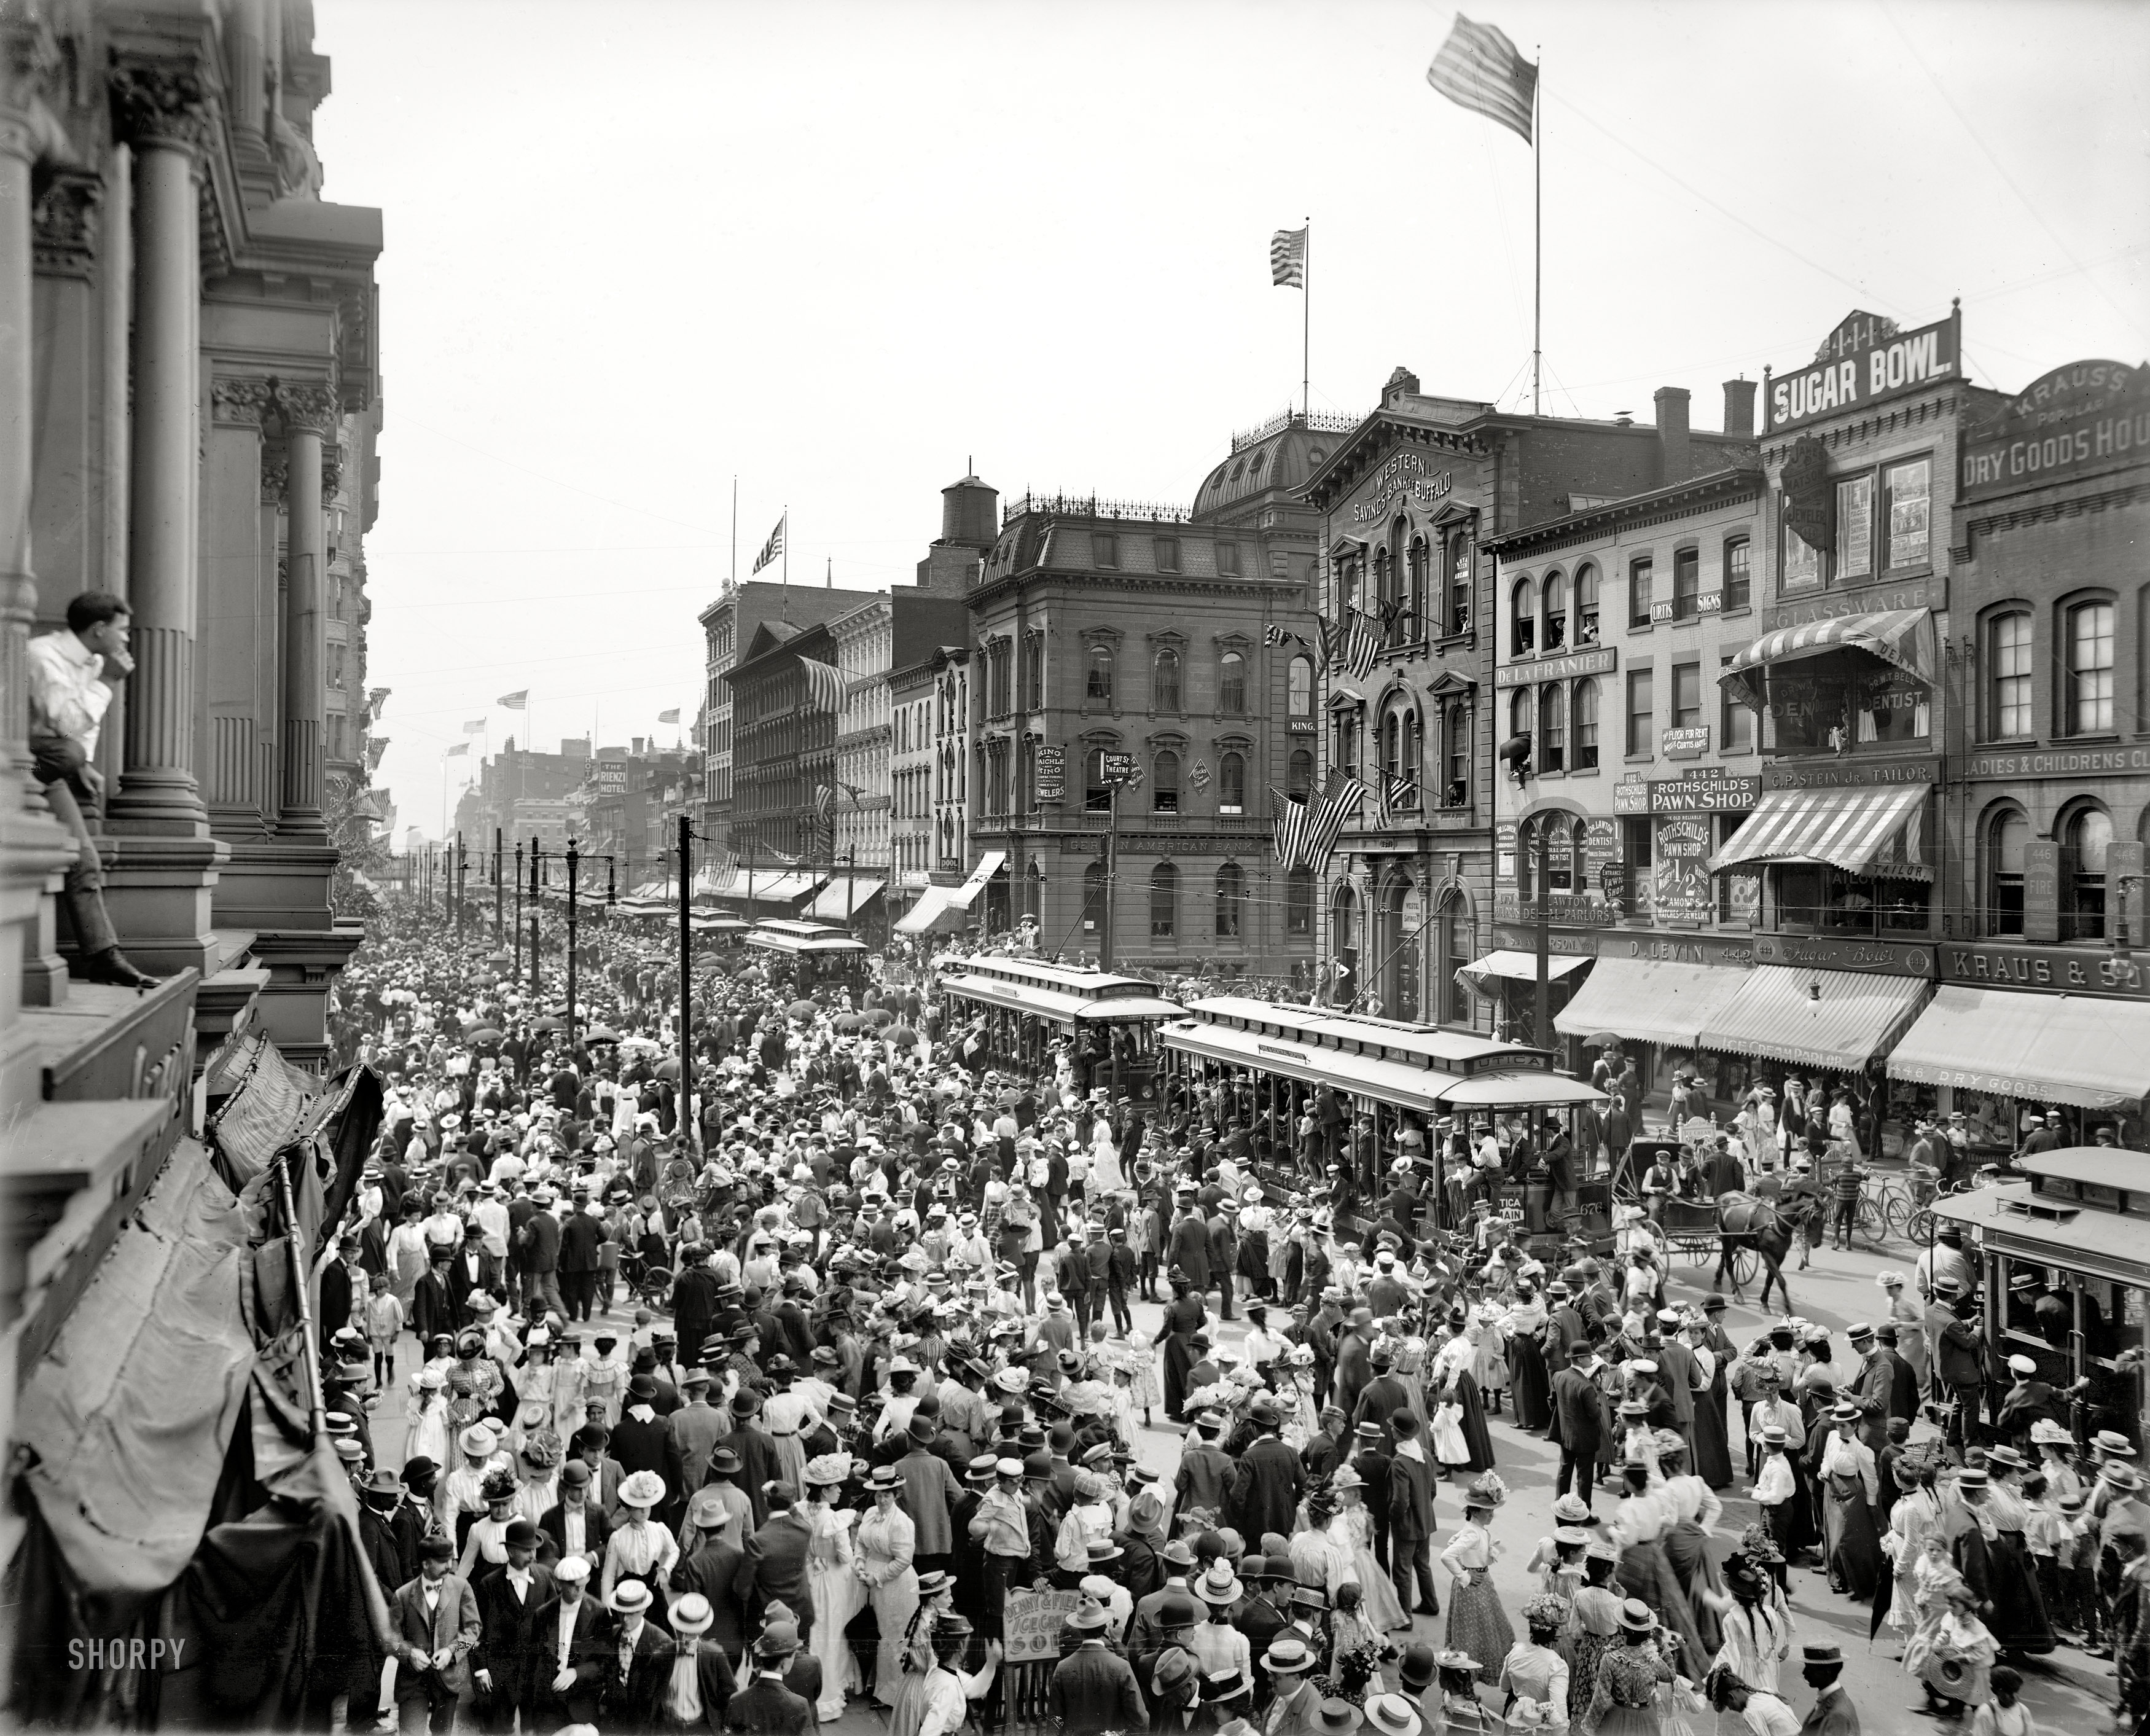 Buffalo, New York, 1900. "Labor Day parade crowd, Main Street." 8x10 inch dry plate glass negative, Detroit Publishing Company. View full size.